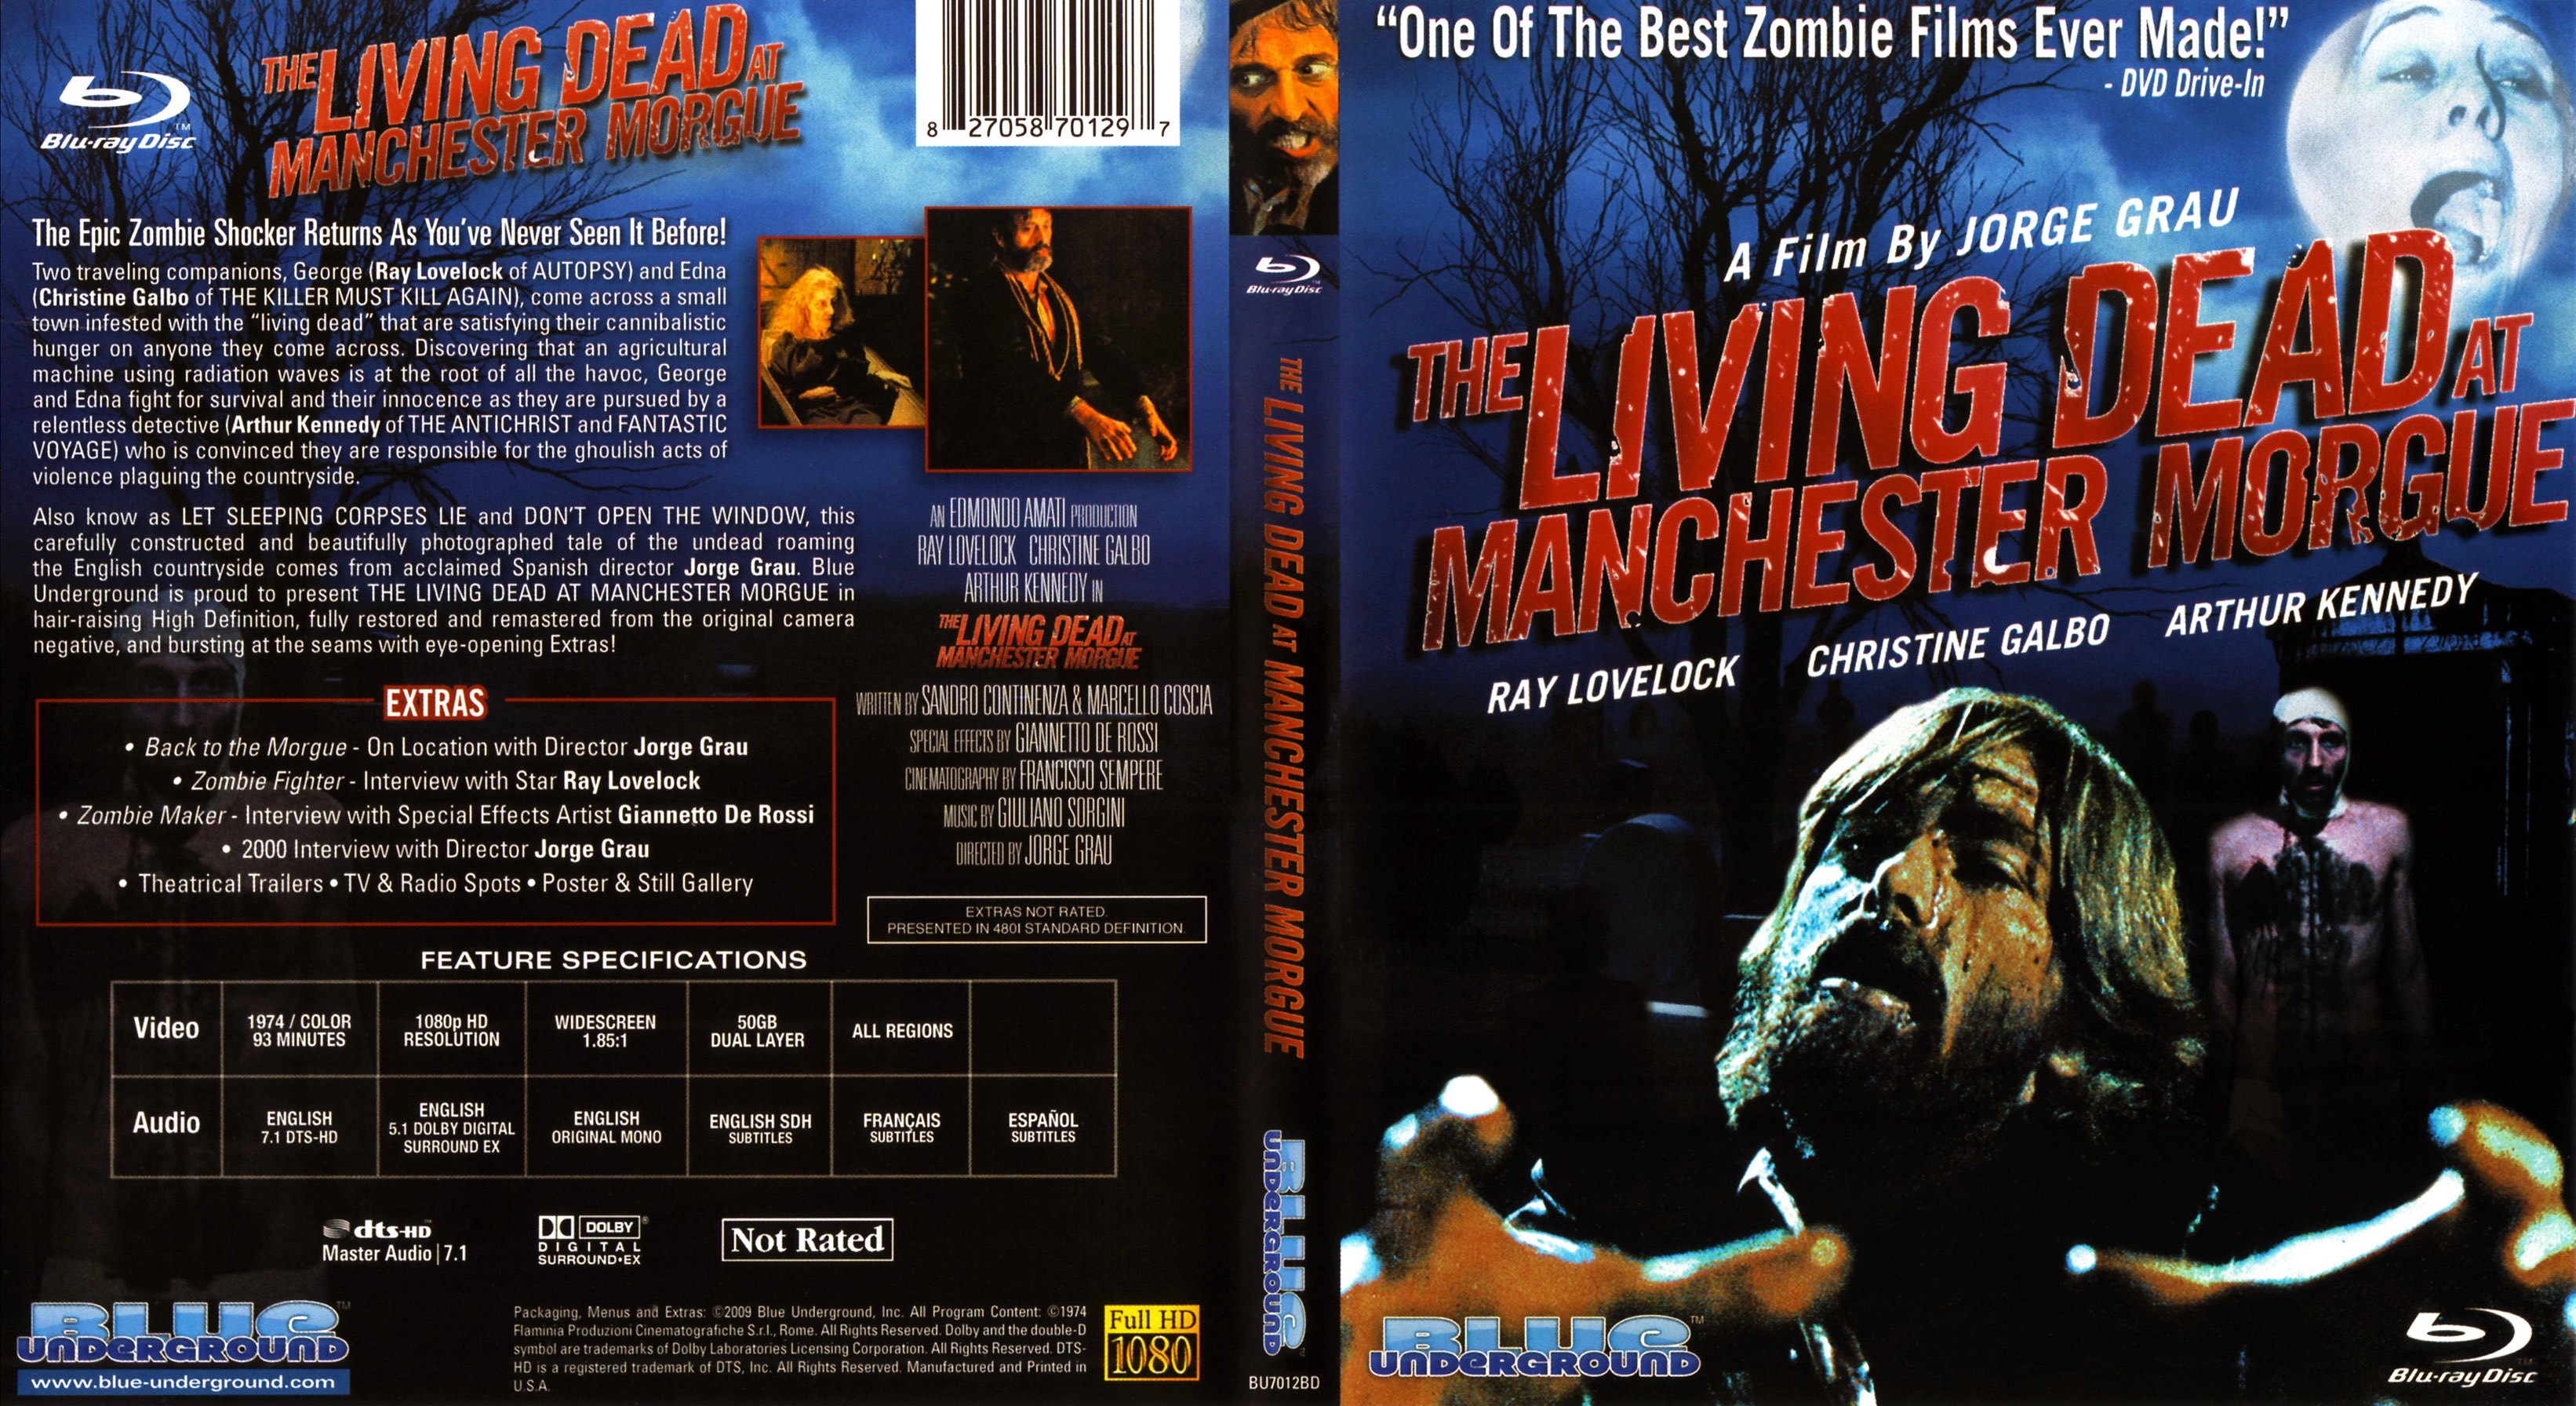 Jaquette DVD The living dead at Manchester morgue (BLU-RAY) Zone 1